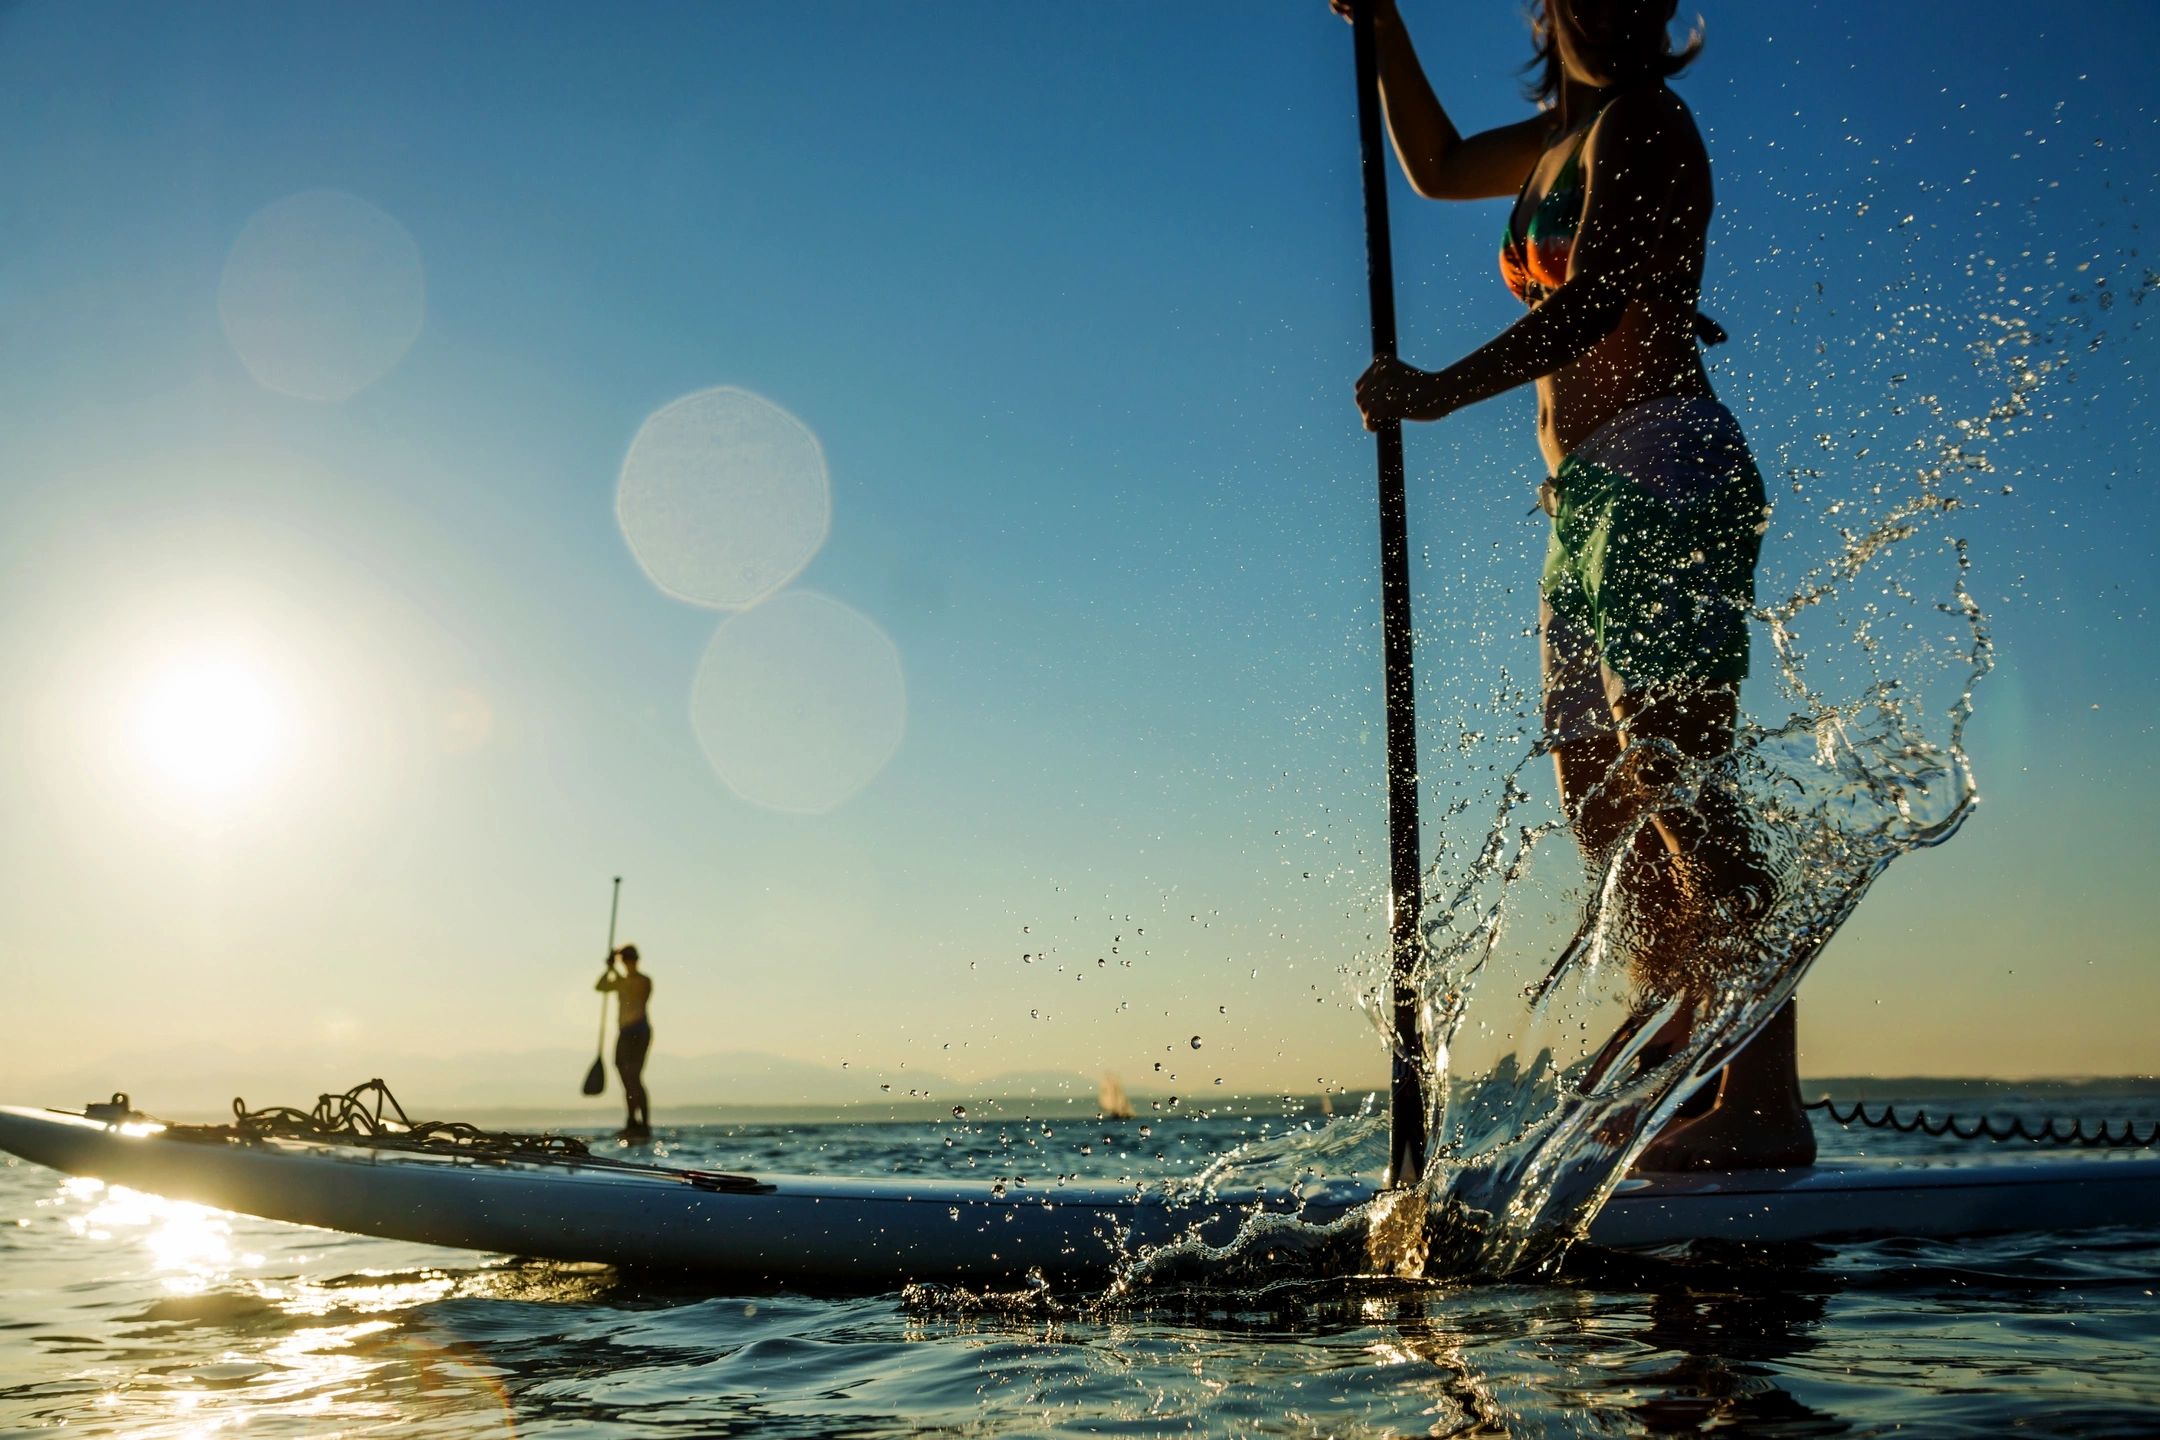 Water sports, stand up paddle boarding 